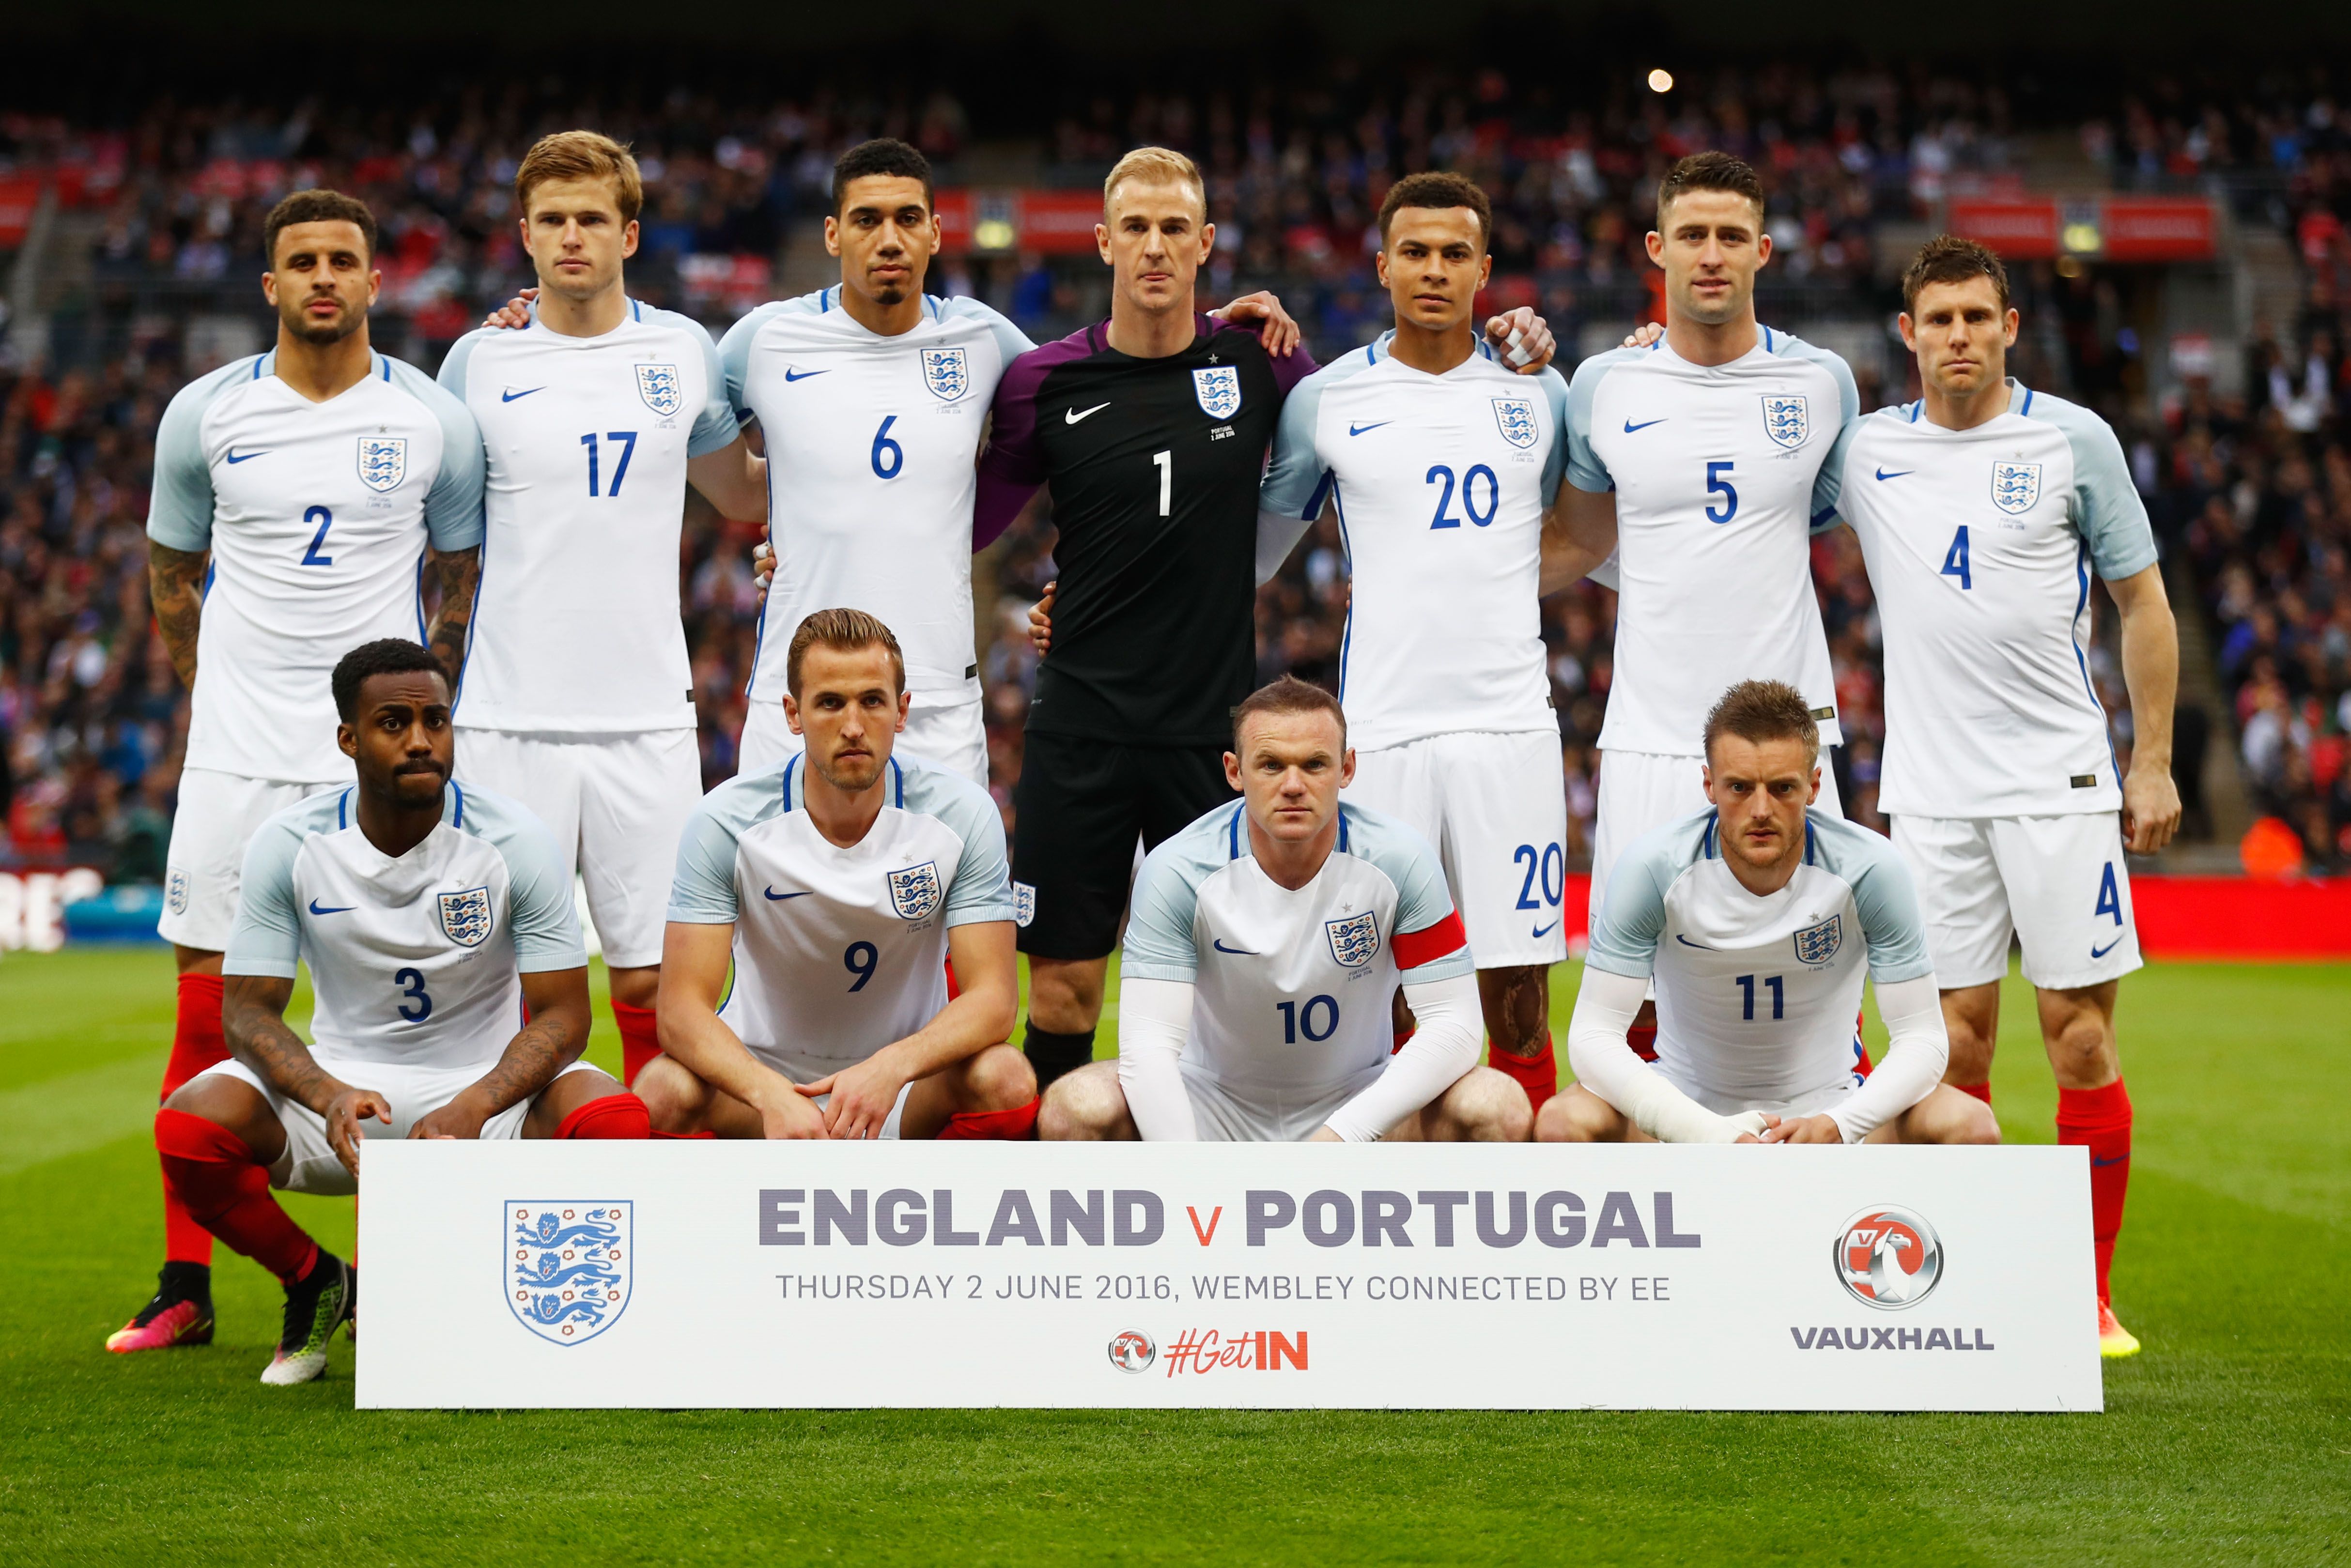  The image shows the England national football team posing for a team photo before a match against Portugal.